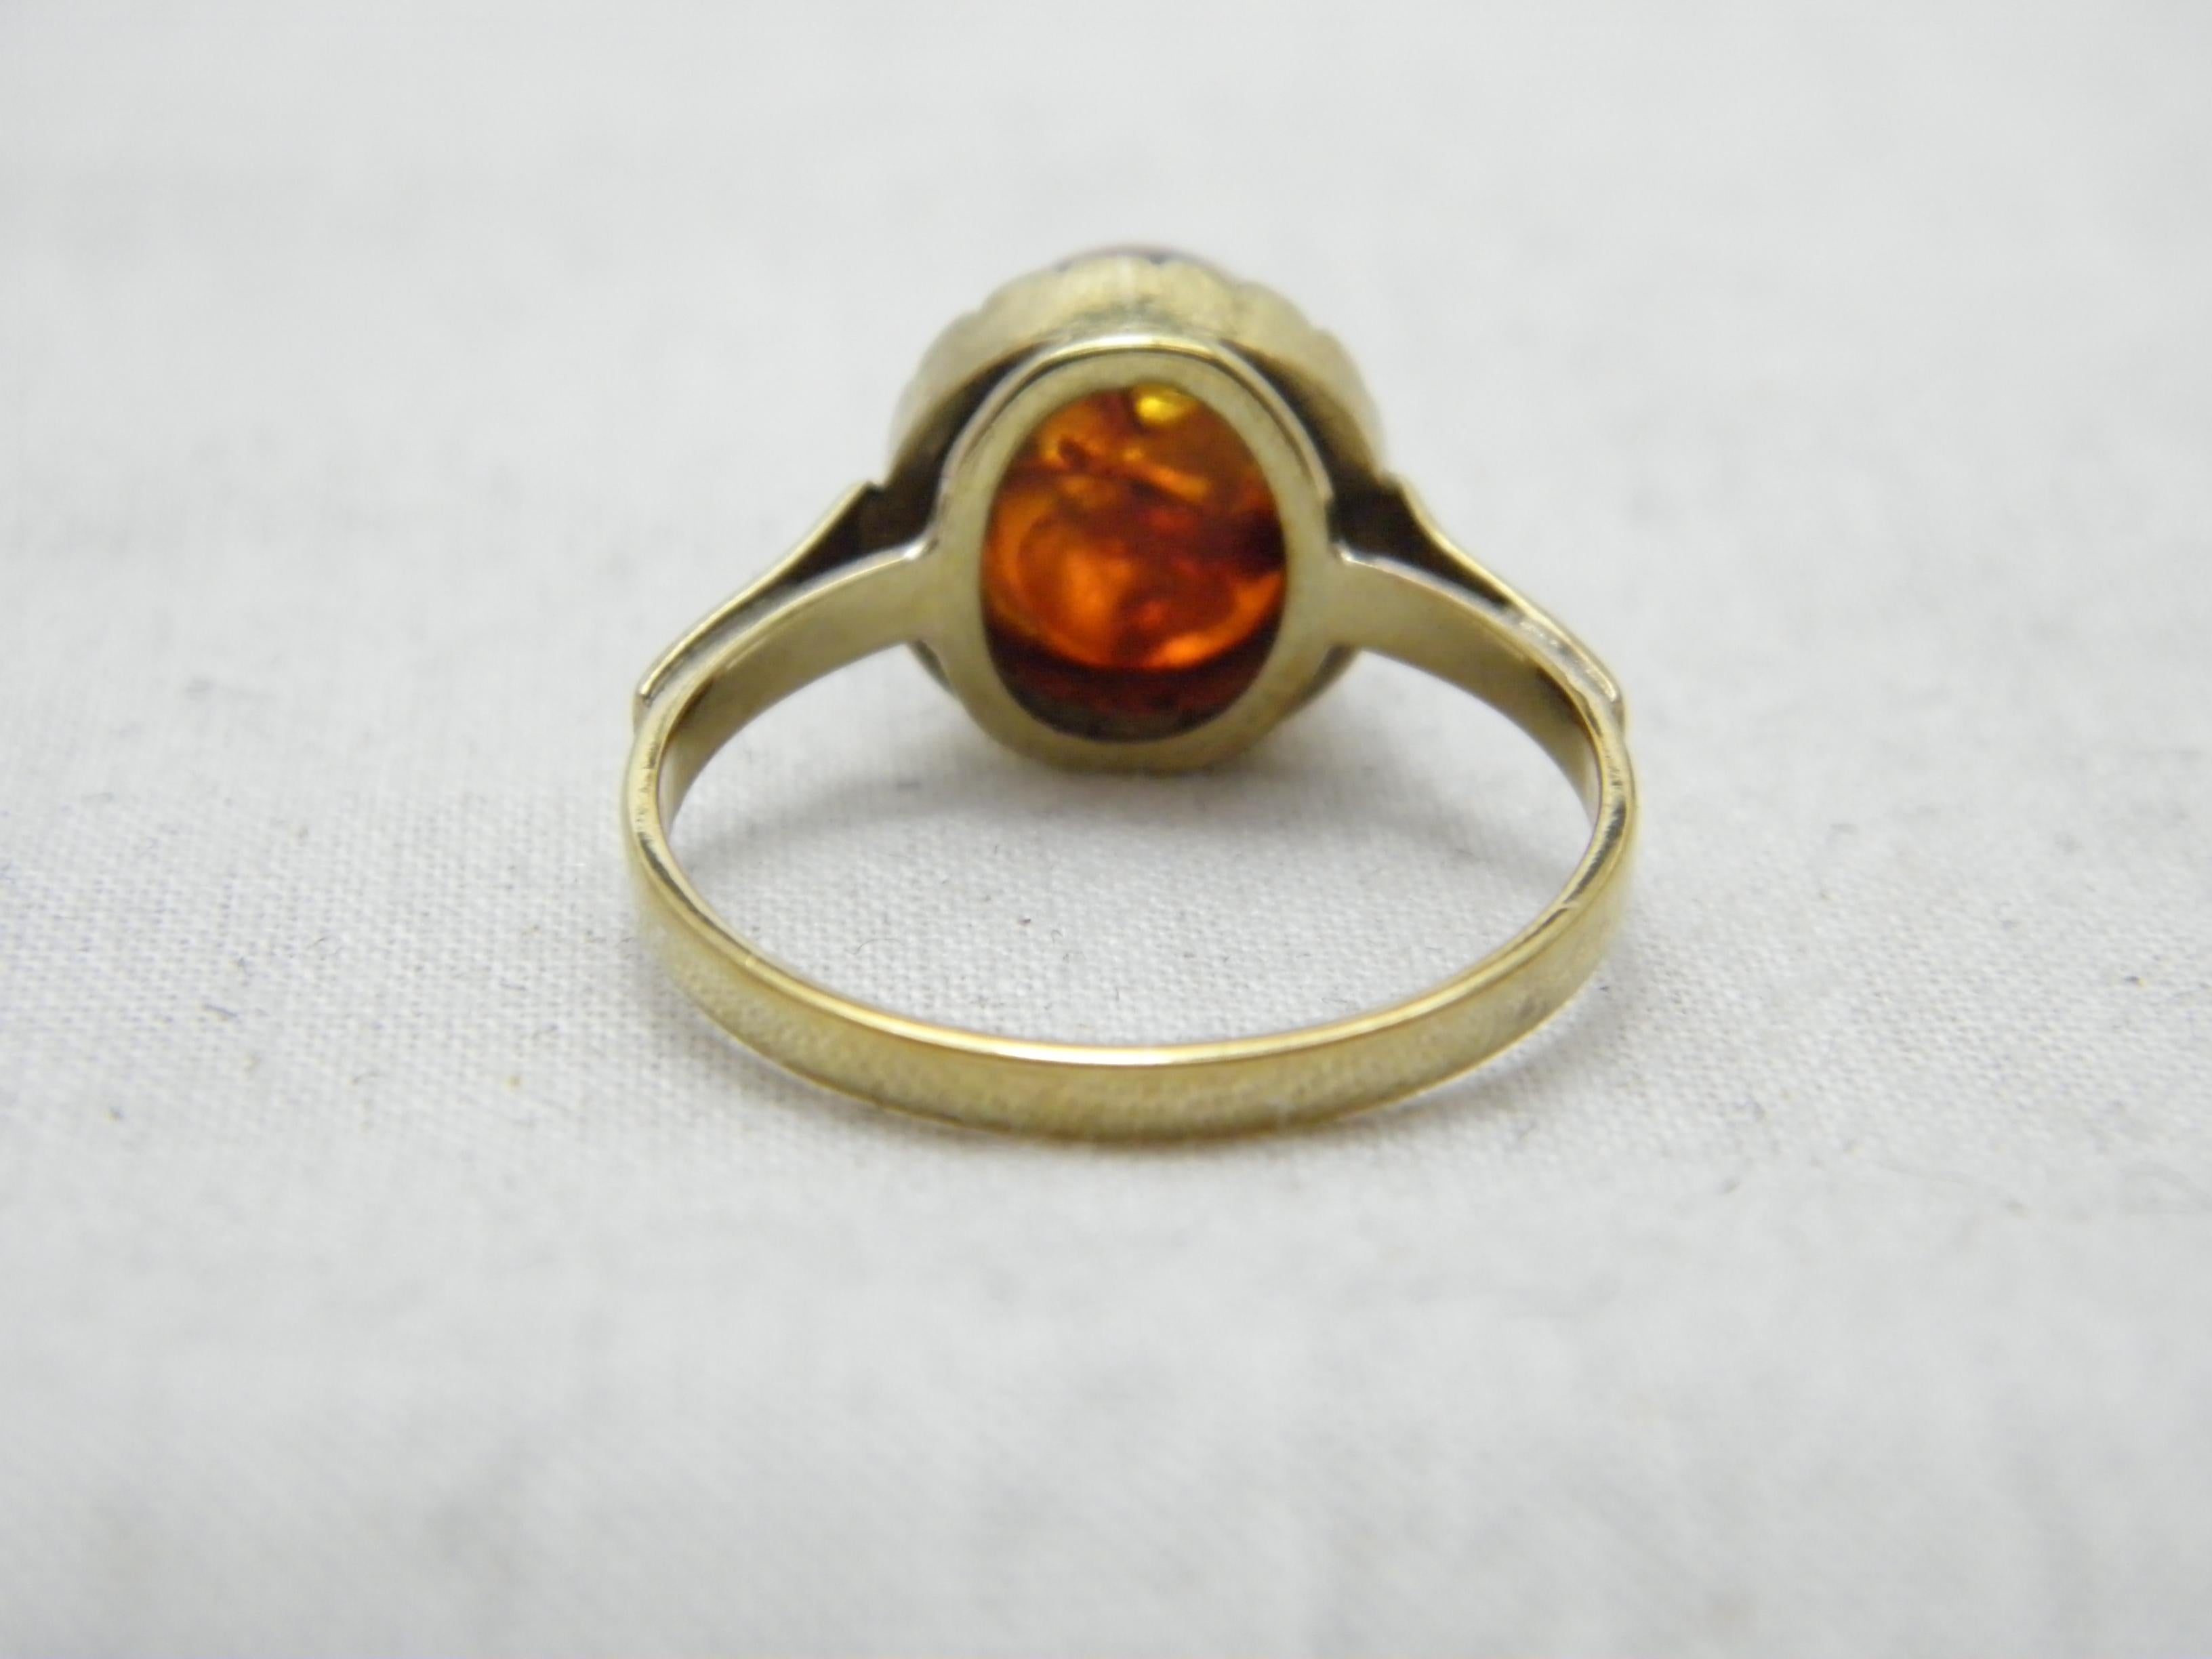 Antique 8ct Gold Baltic Amber Poison Ring Art Deco c1920 333 Purity For Sale 2